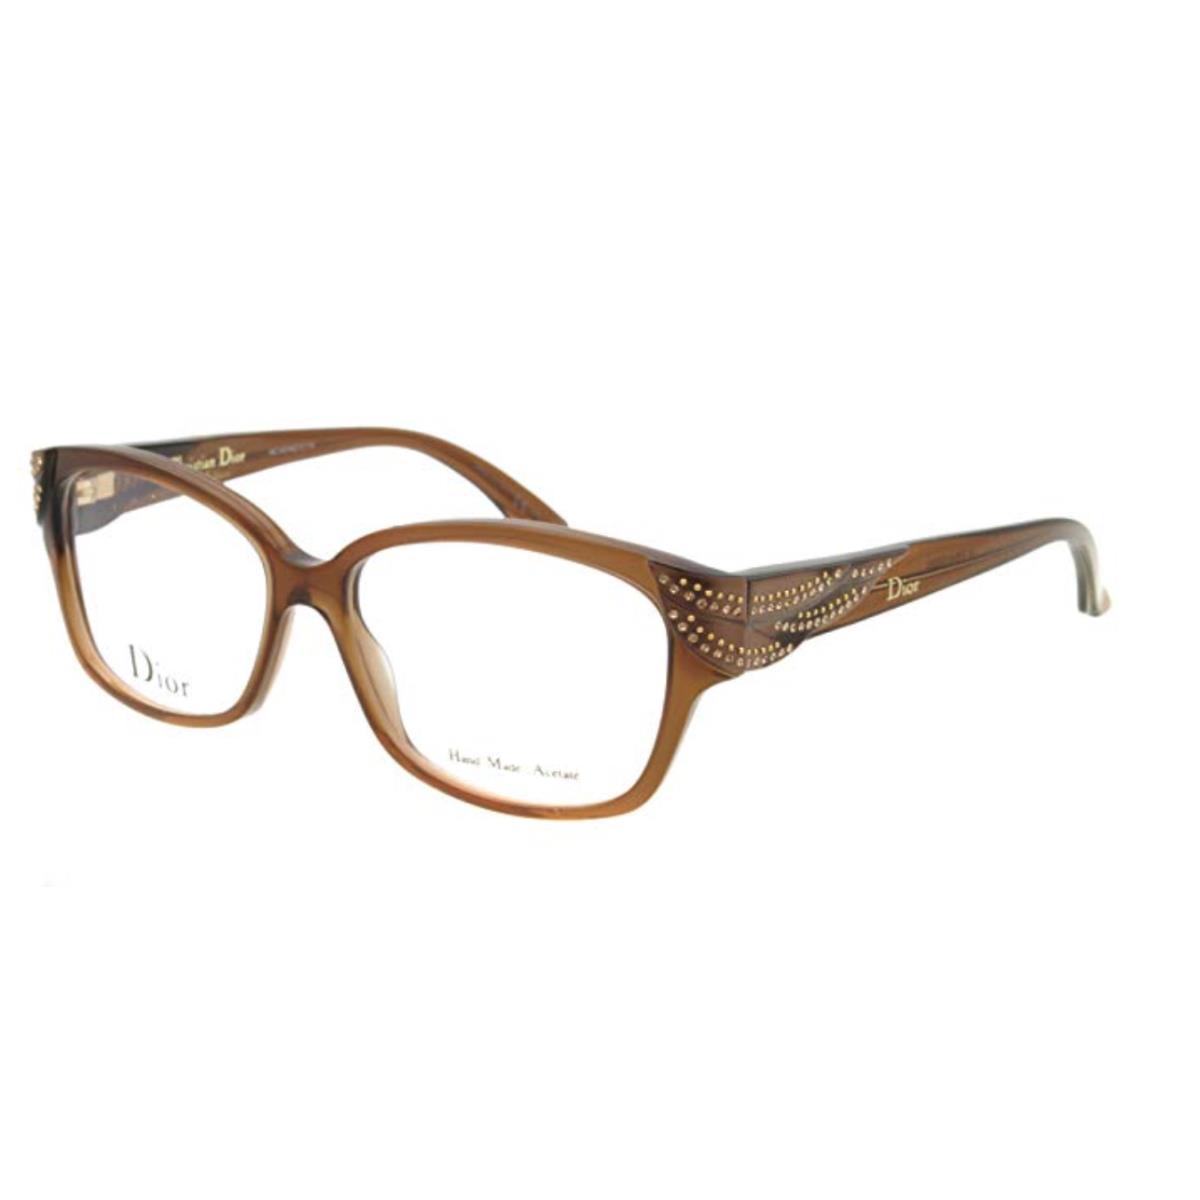 Yves Saint Laurent Christian Dior Womens Eyeglasses CD 3229 Brown Crystals Limited Edition